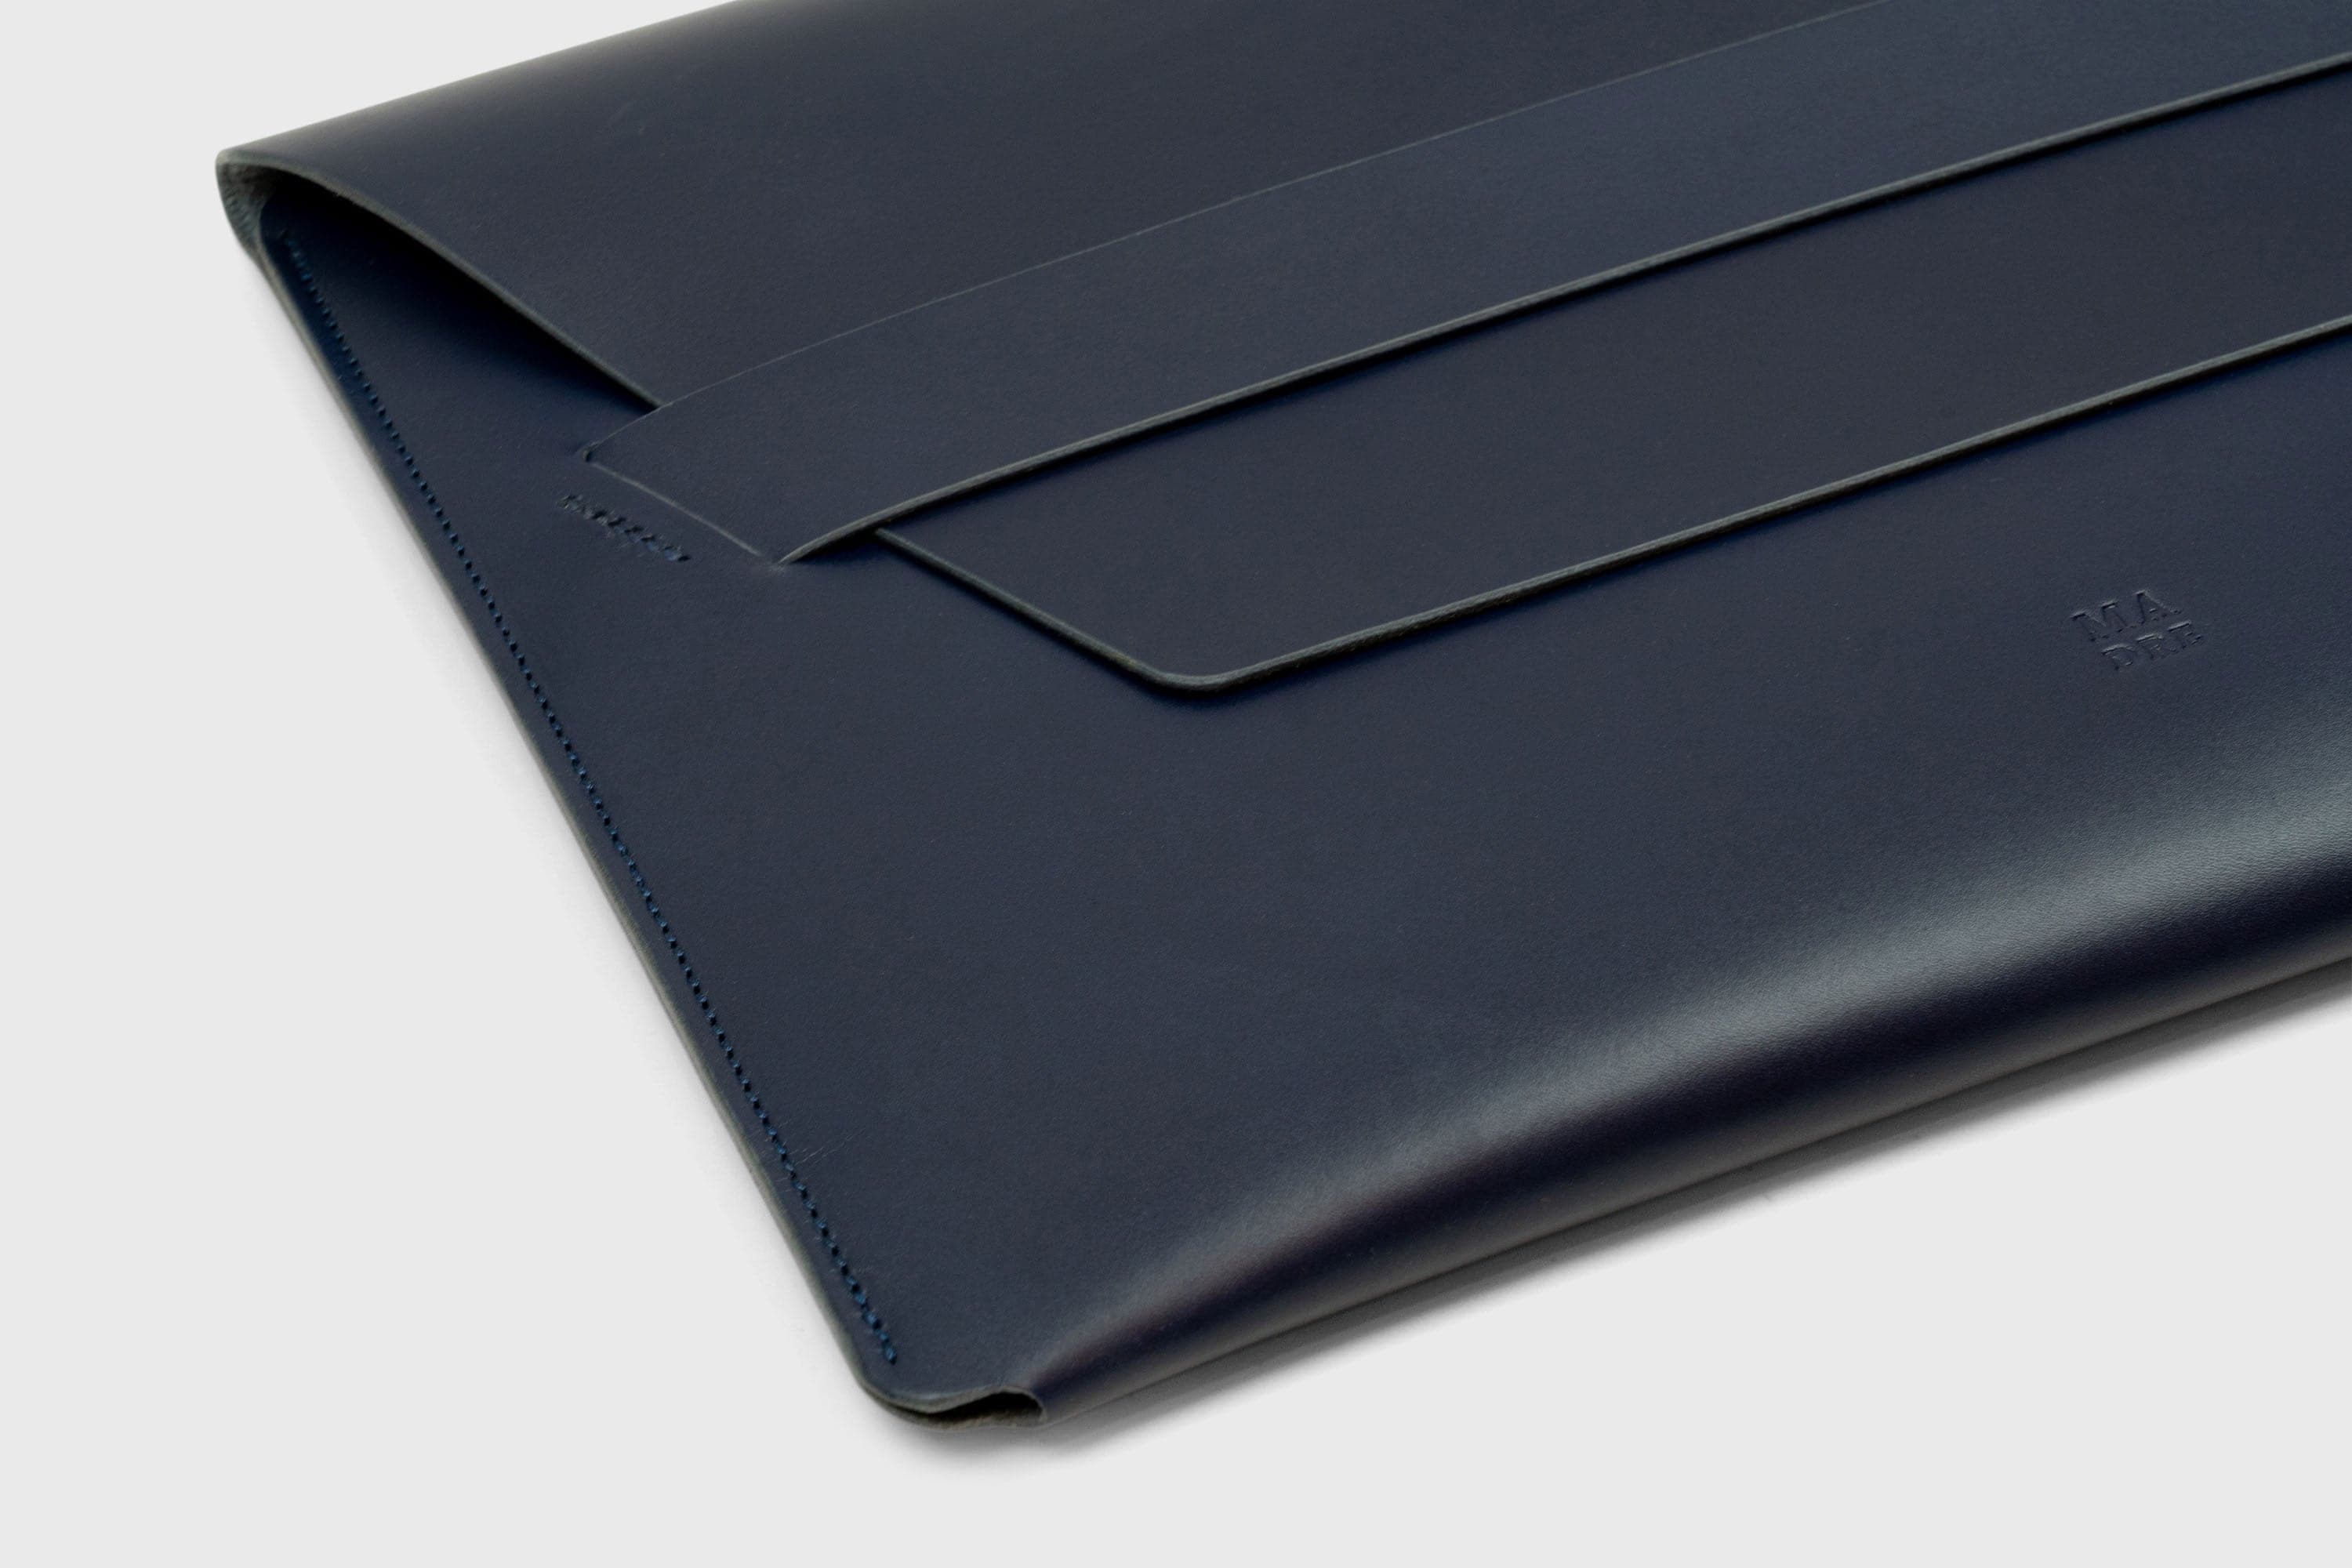 MacBook Sleeve 16 Inch Leather Dark Marine Blue Vegetable Tanned Leather Laptop Sleeve Exclusive Quality Design By Manuel Dreesmann Atelier Madre Barcelona Spain